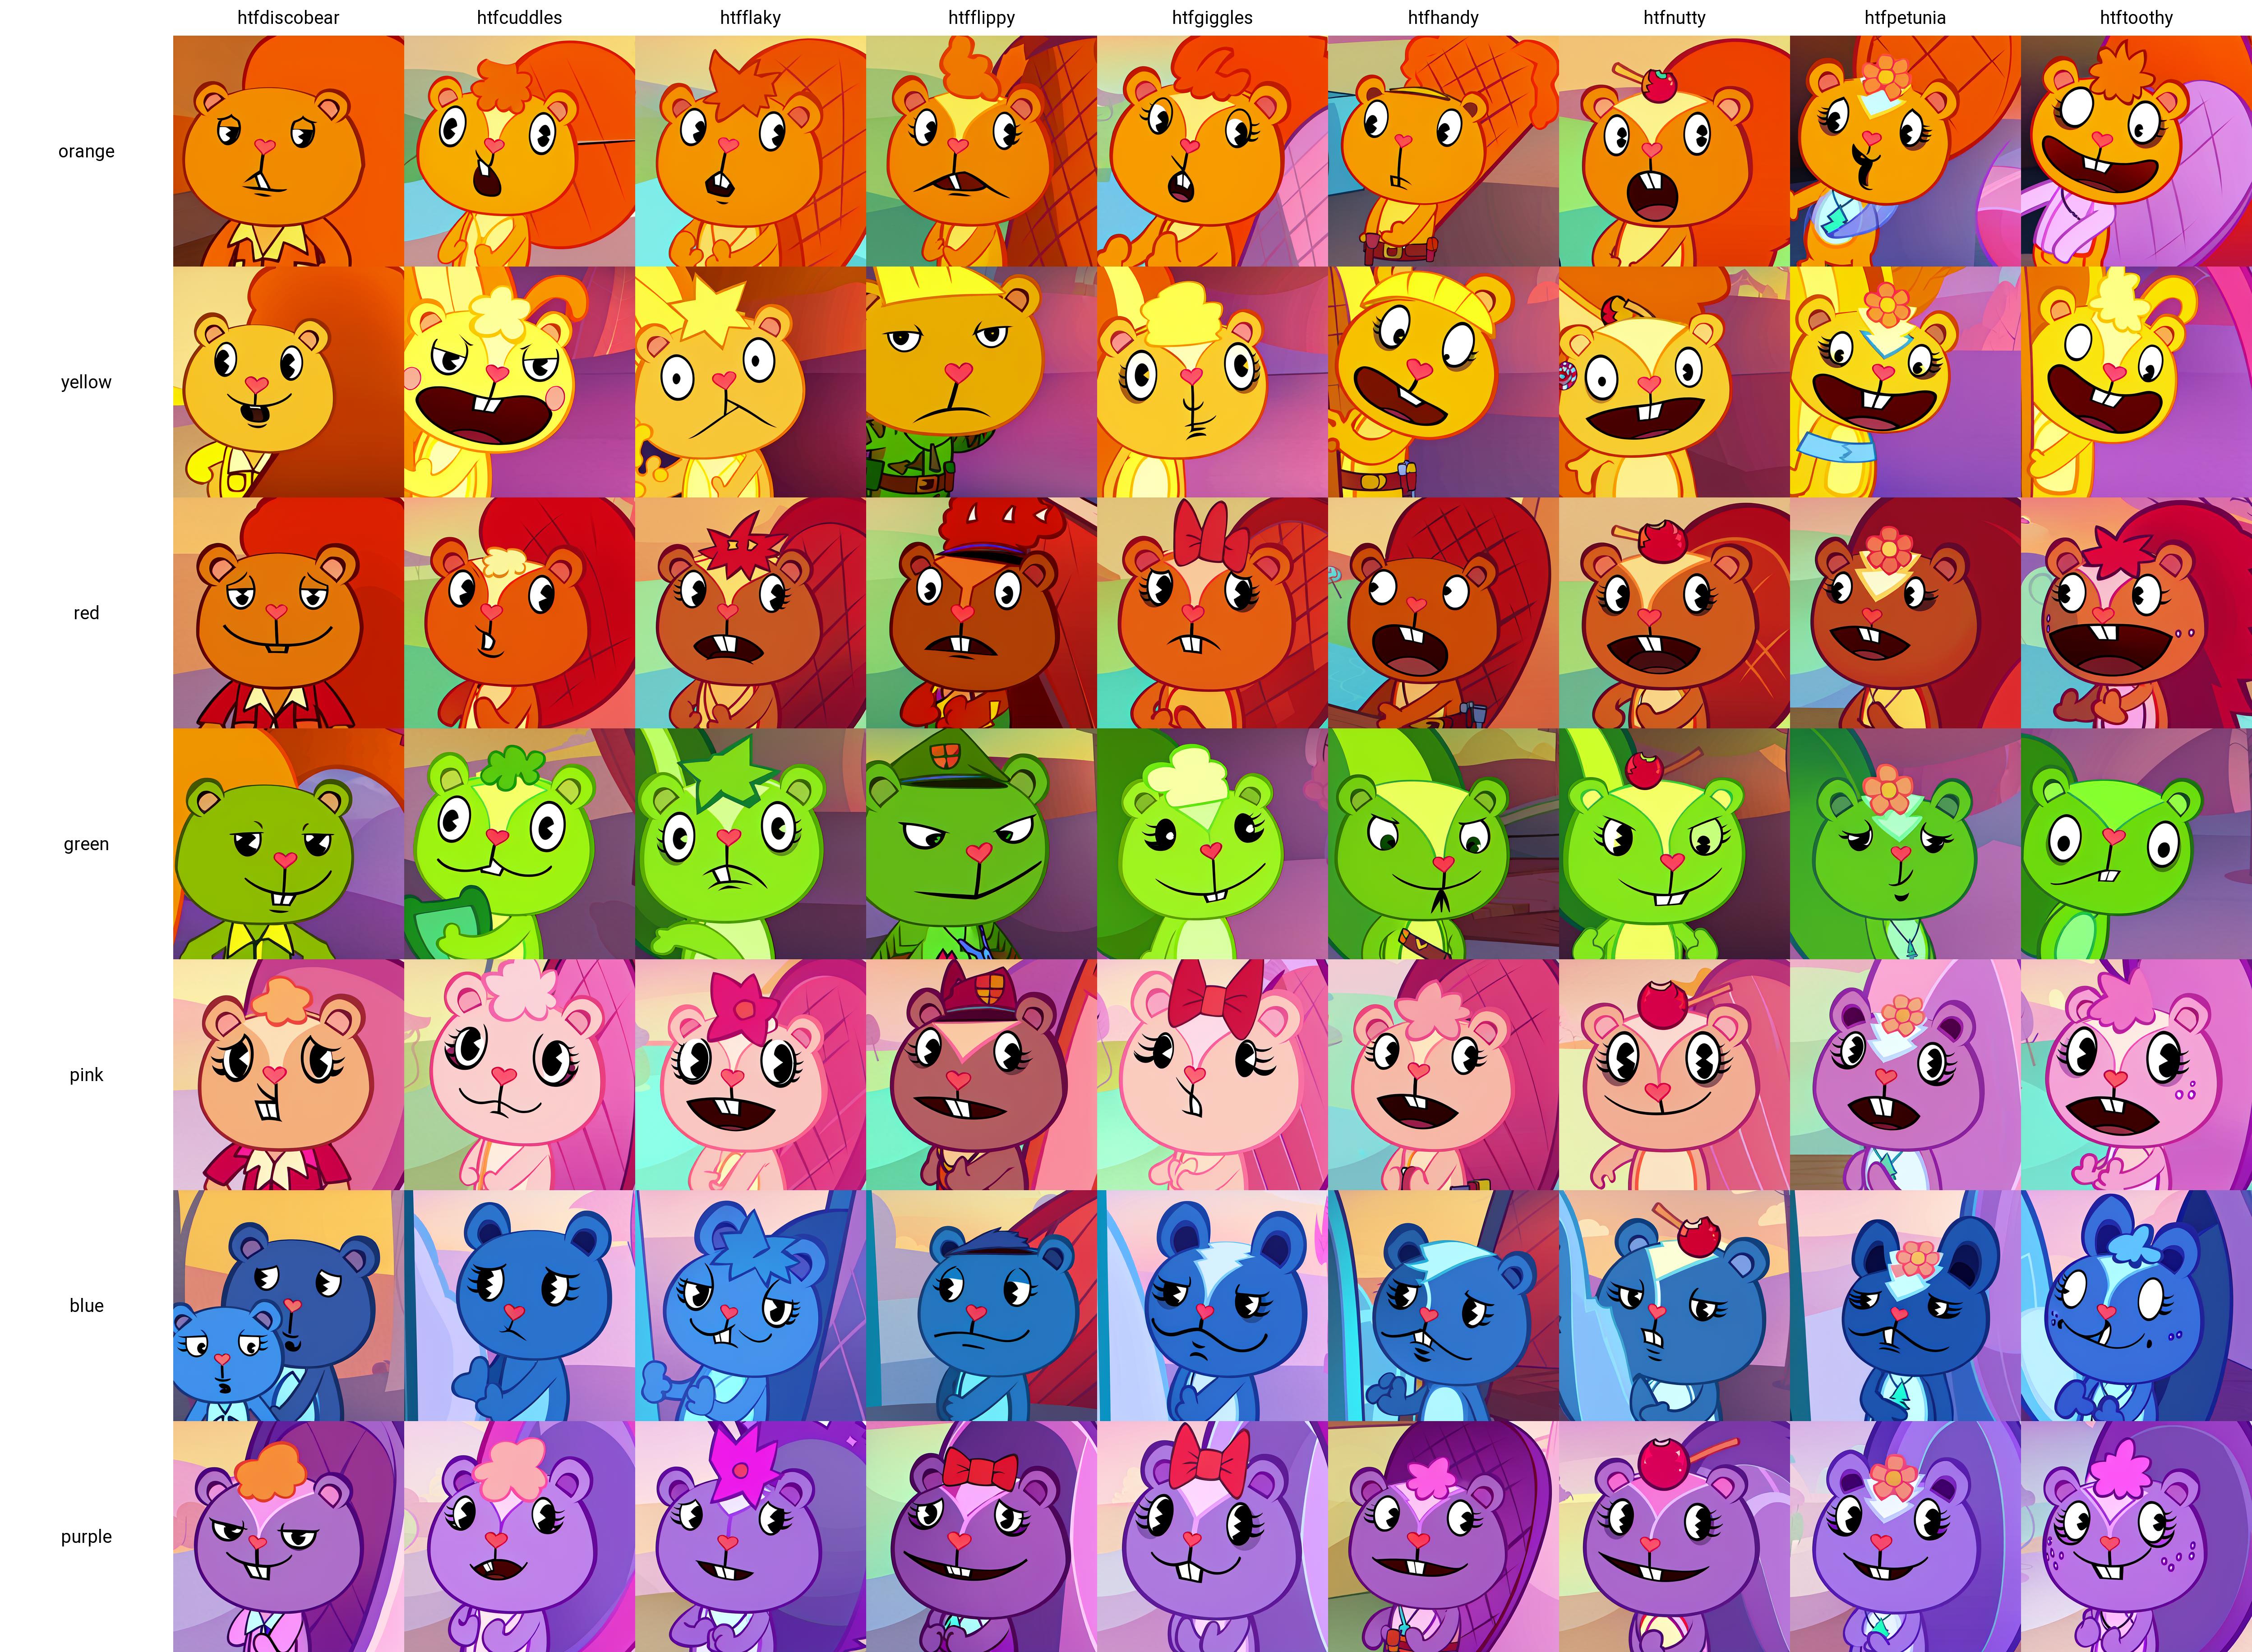 Happy Tree Friends - Multi Characters image by Sylvanal